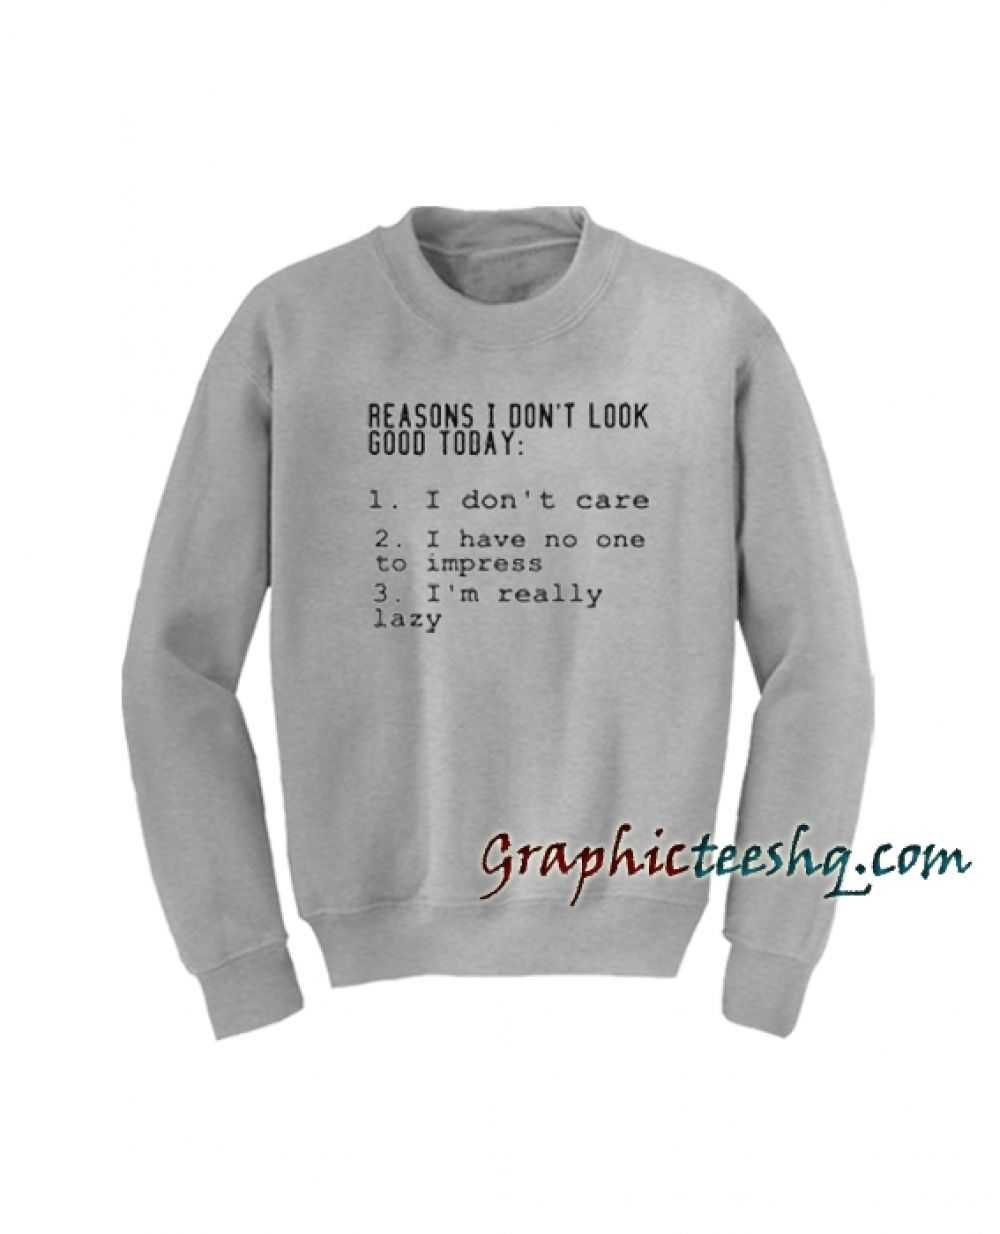 Reasons I Don't Look Good Today Sweatshirt is best of Cheap Graphic Tee